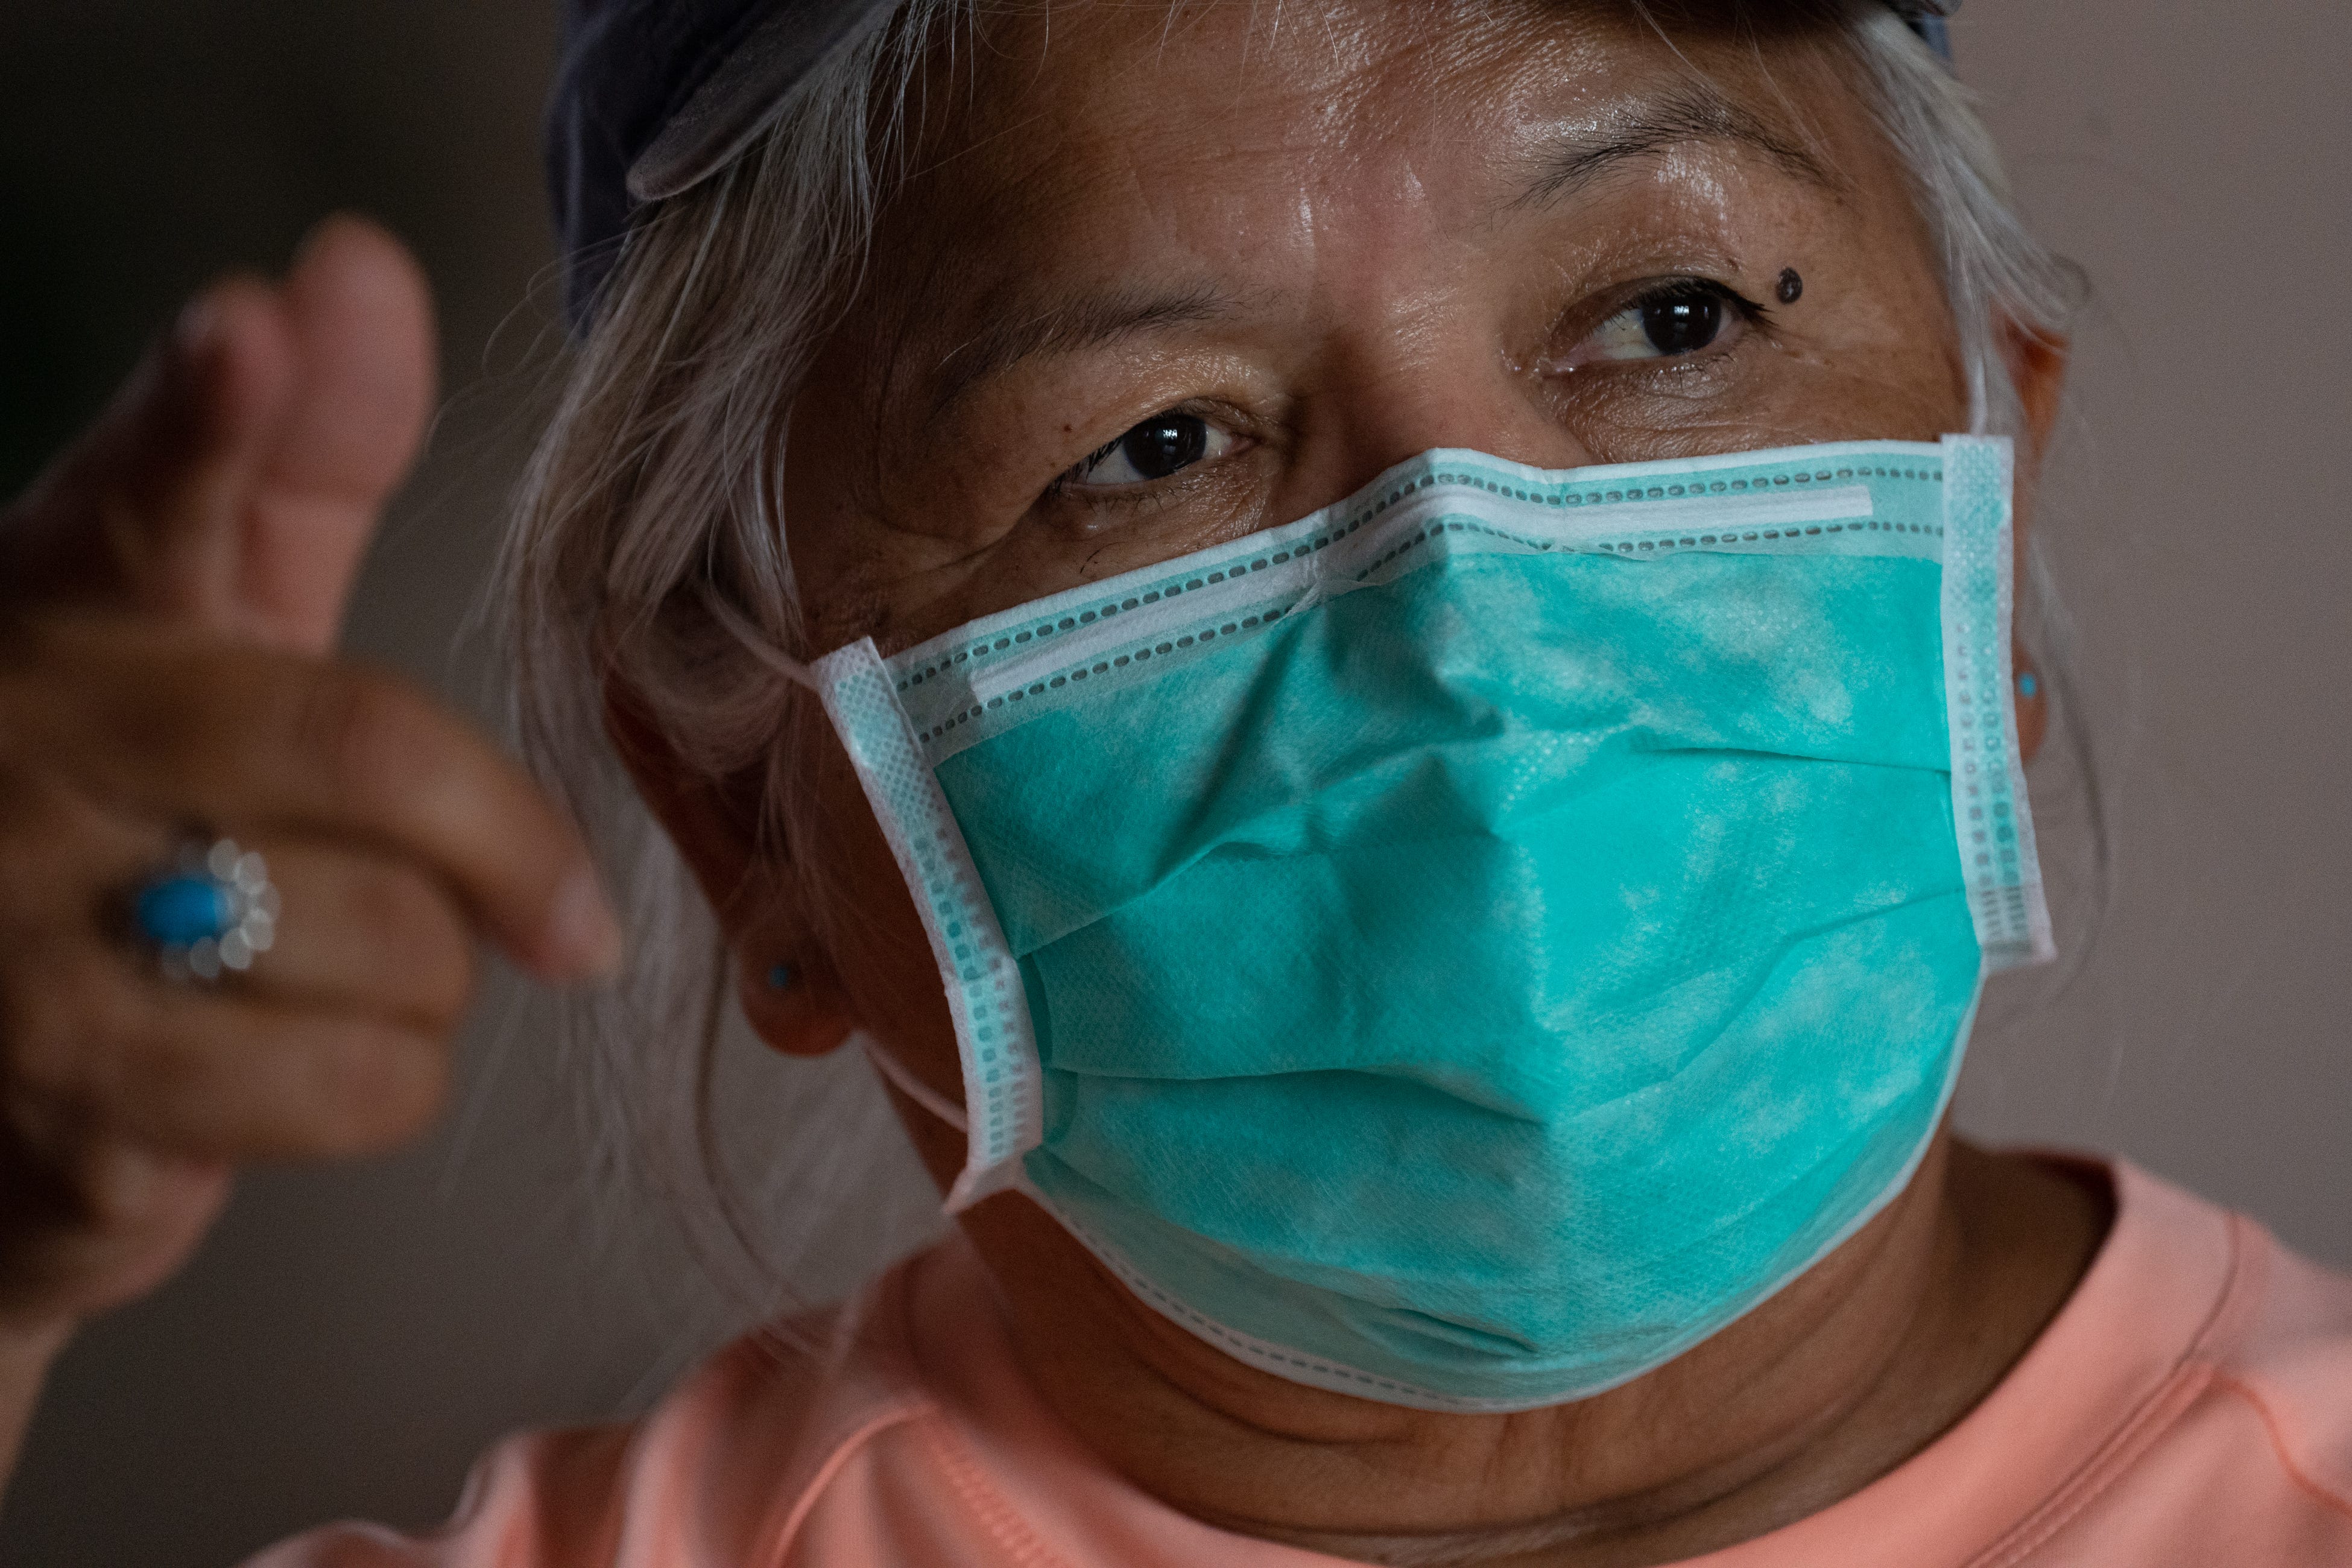 A close up image of JoAnne Yazzie-Pioche, who is wearing a teal mask and peach shirt. She is gesturing while she talks.